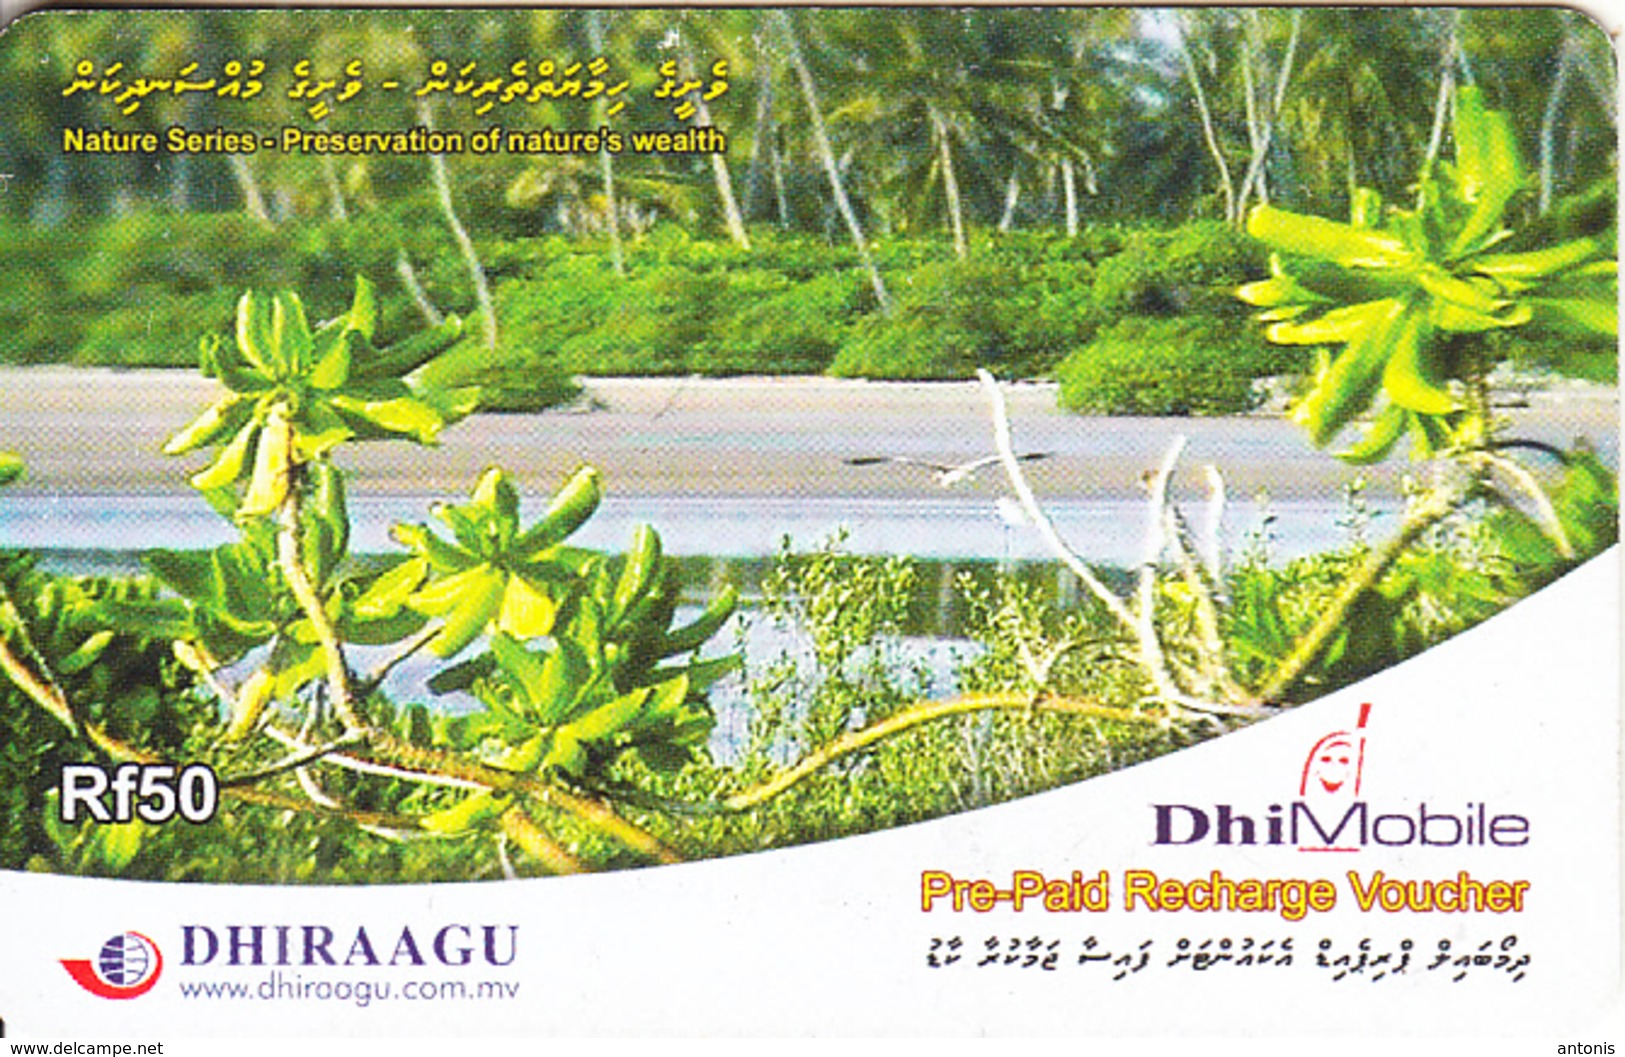 MALDIVES ISL. - Nature/Preservation Of Nature's Wealth, DHI Mobile By Dhiraagu Recharge Card Rf 50, Used - Maldive